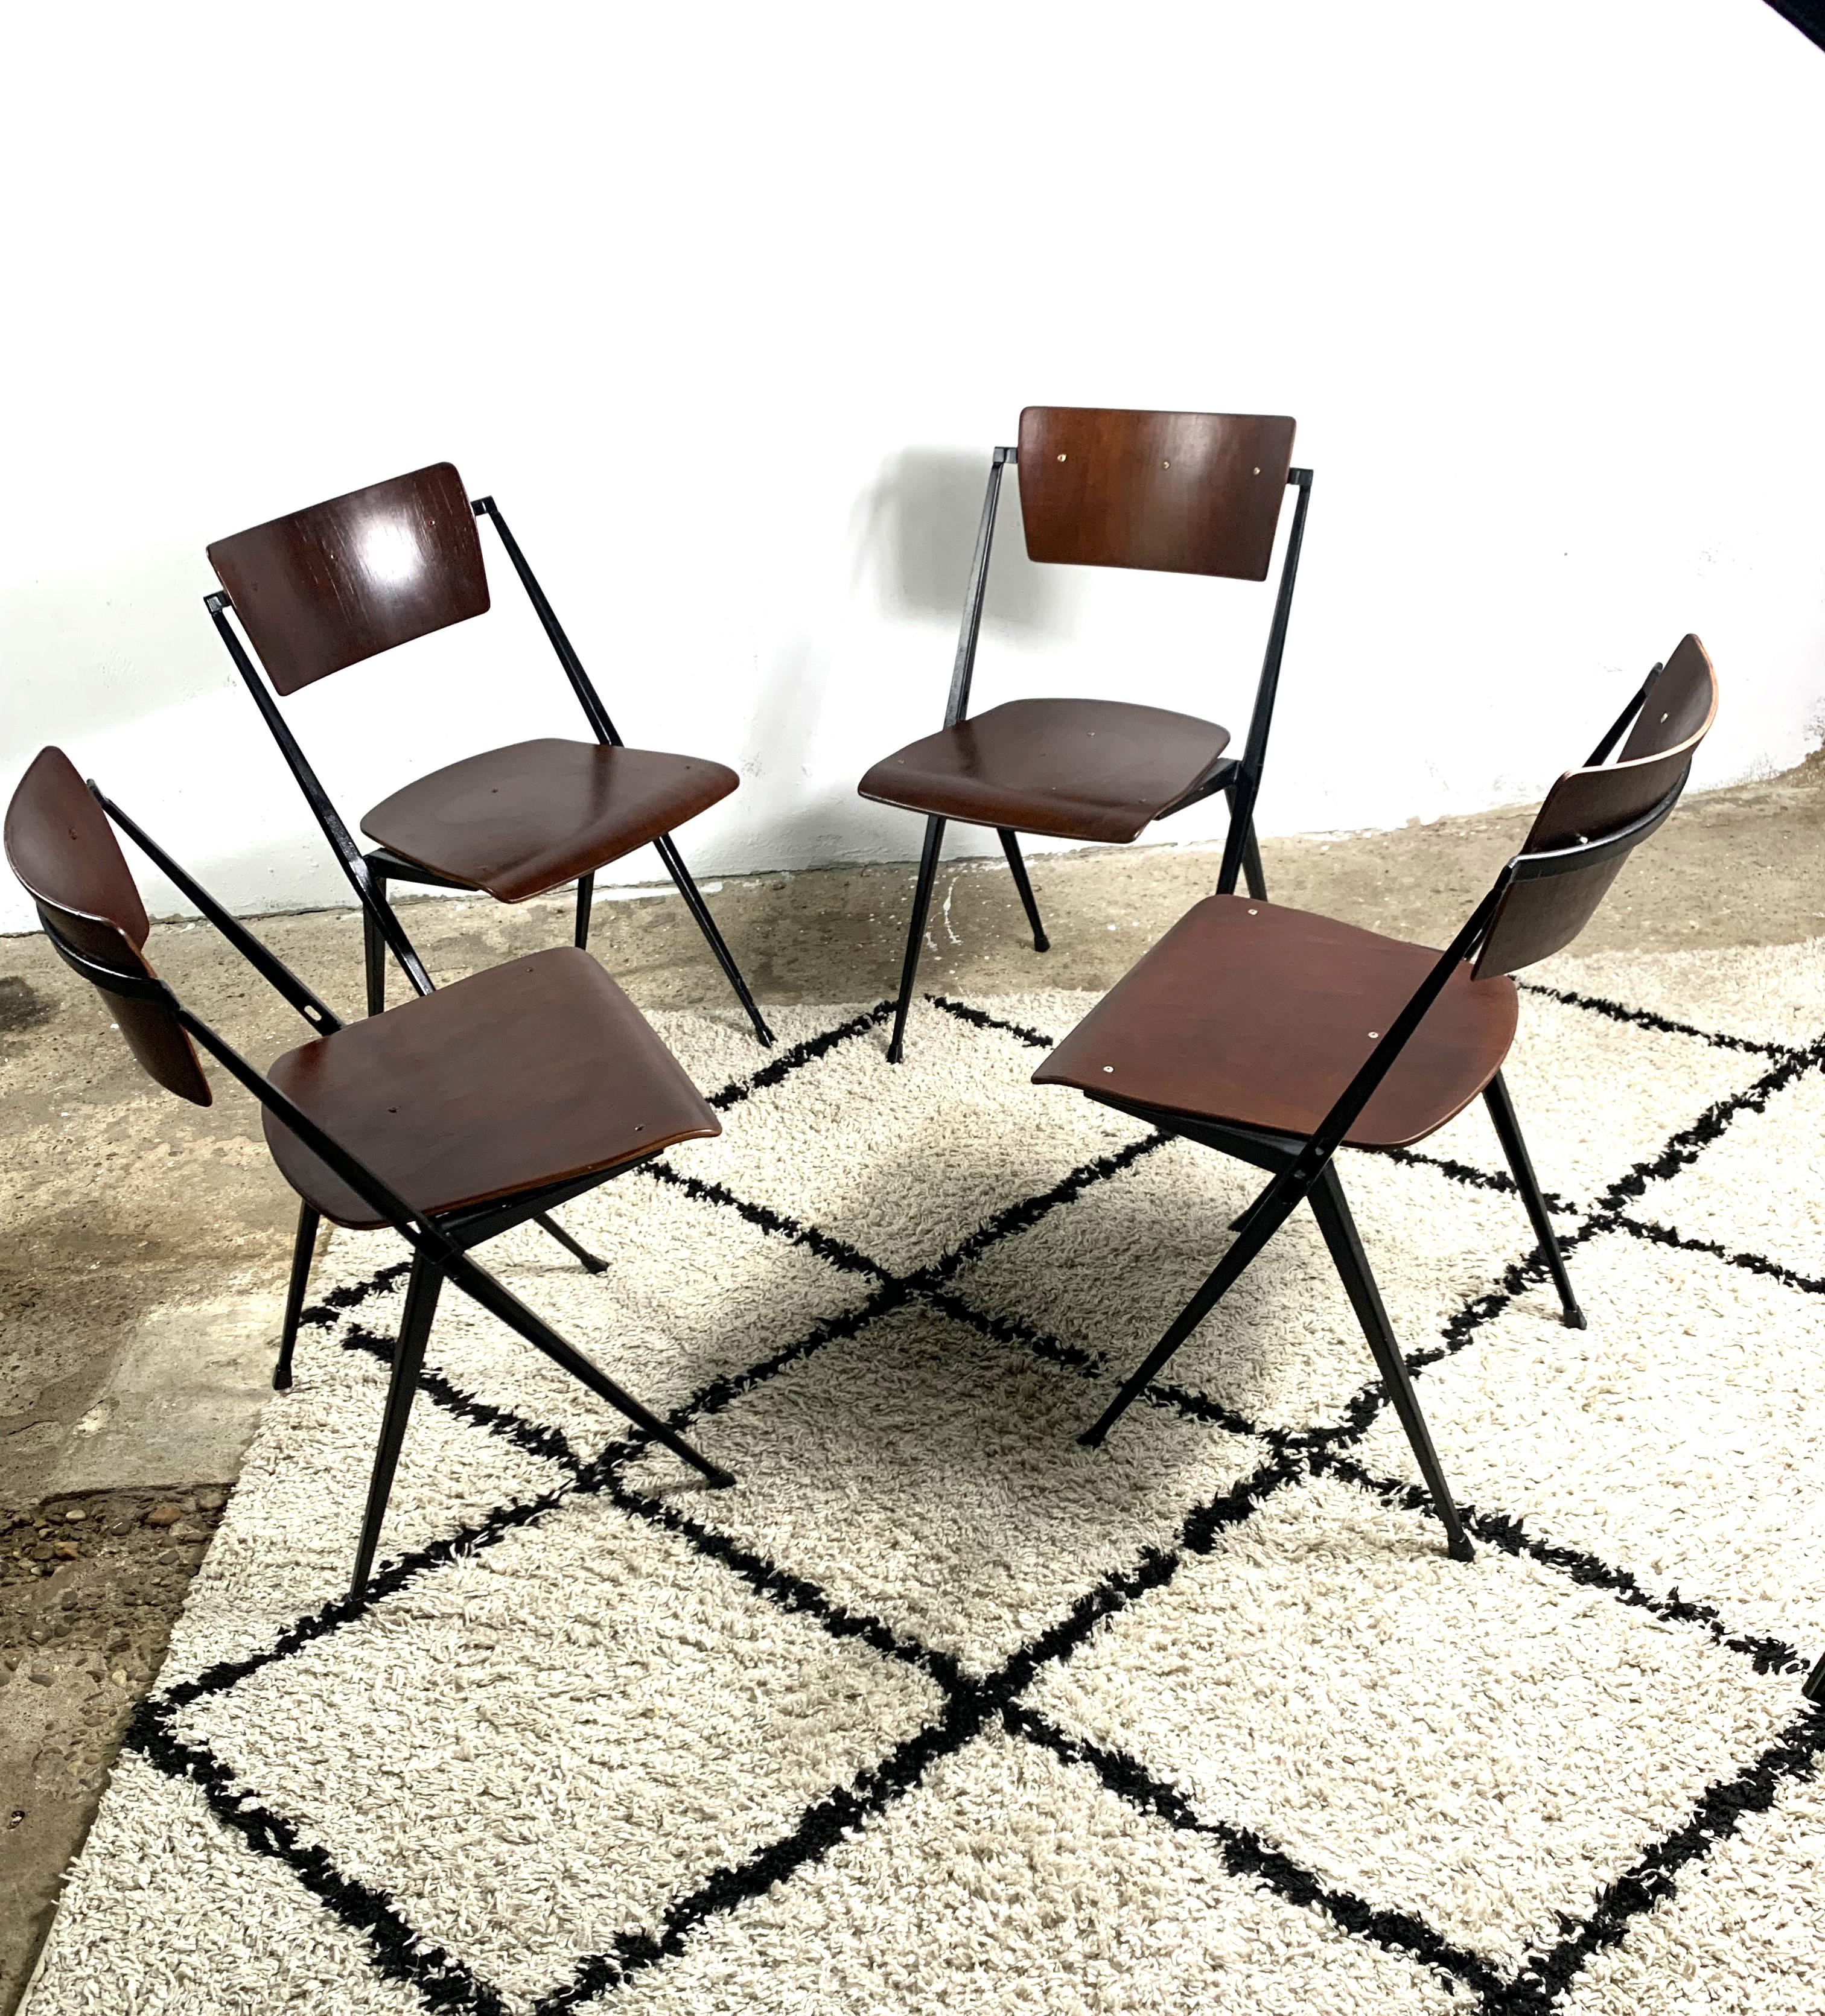 Pyramide Chairs By Wim Rietveld Set Of 4, Industrial Mid Century For Sale 5